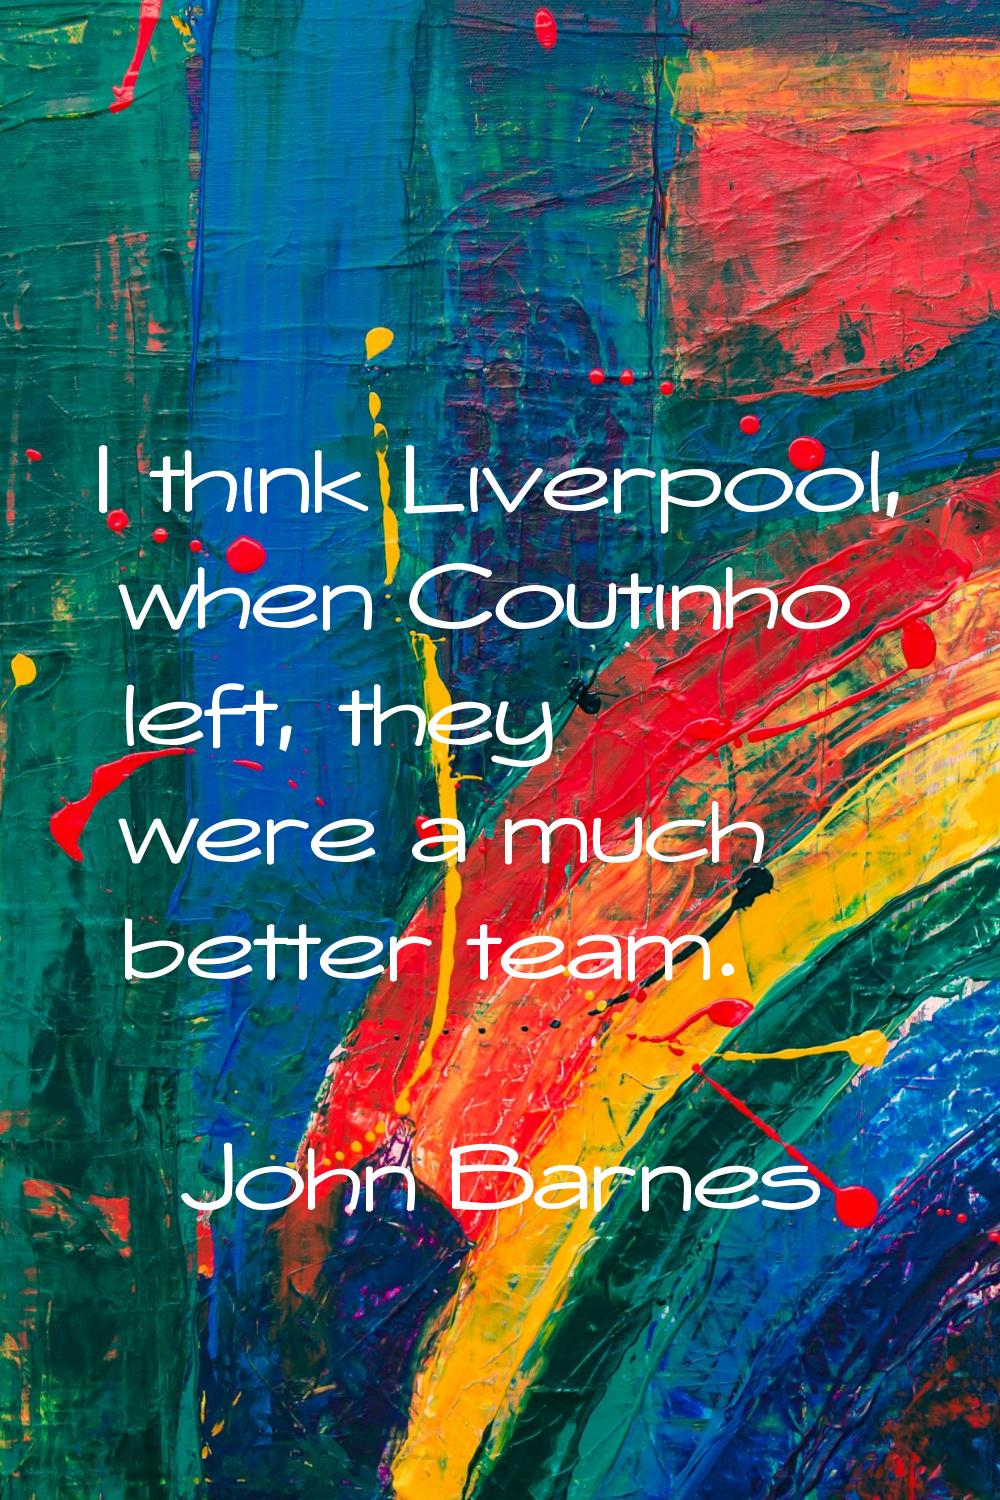 I think Liverpool, when Coutinho left, they were a much better team.